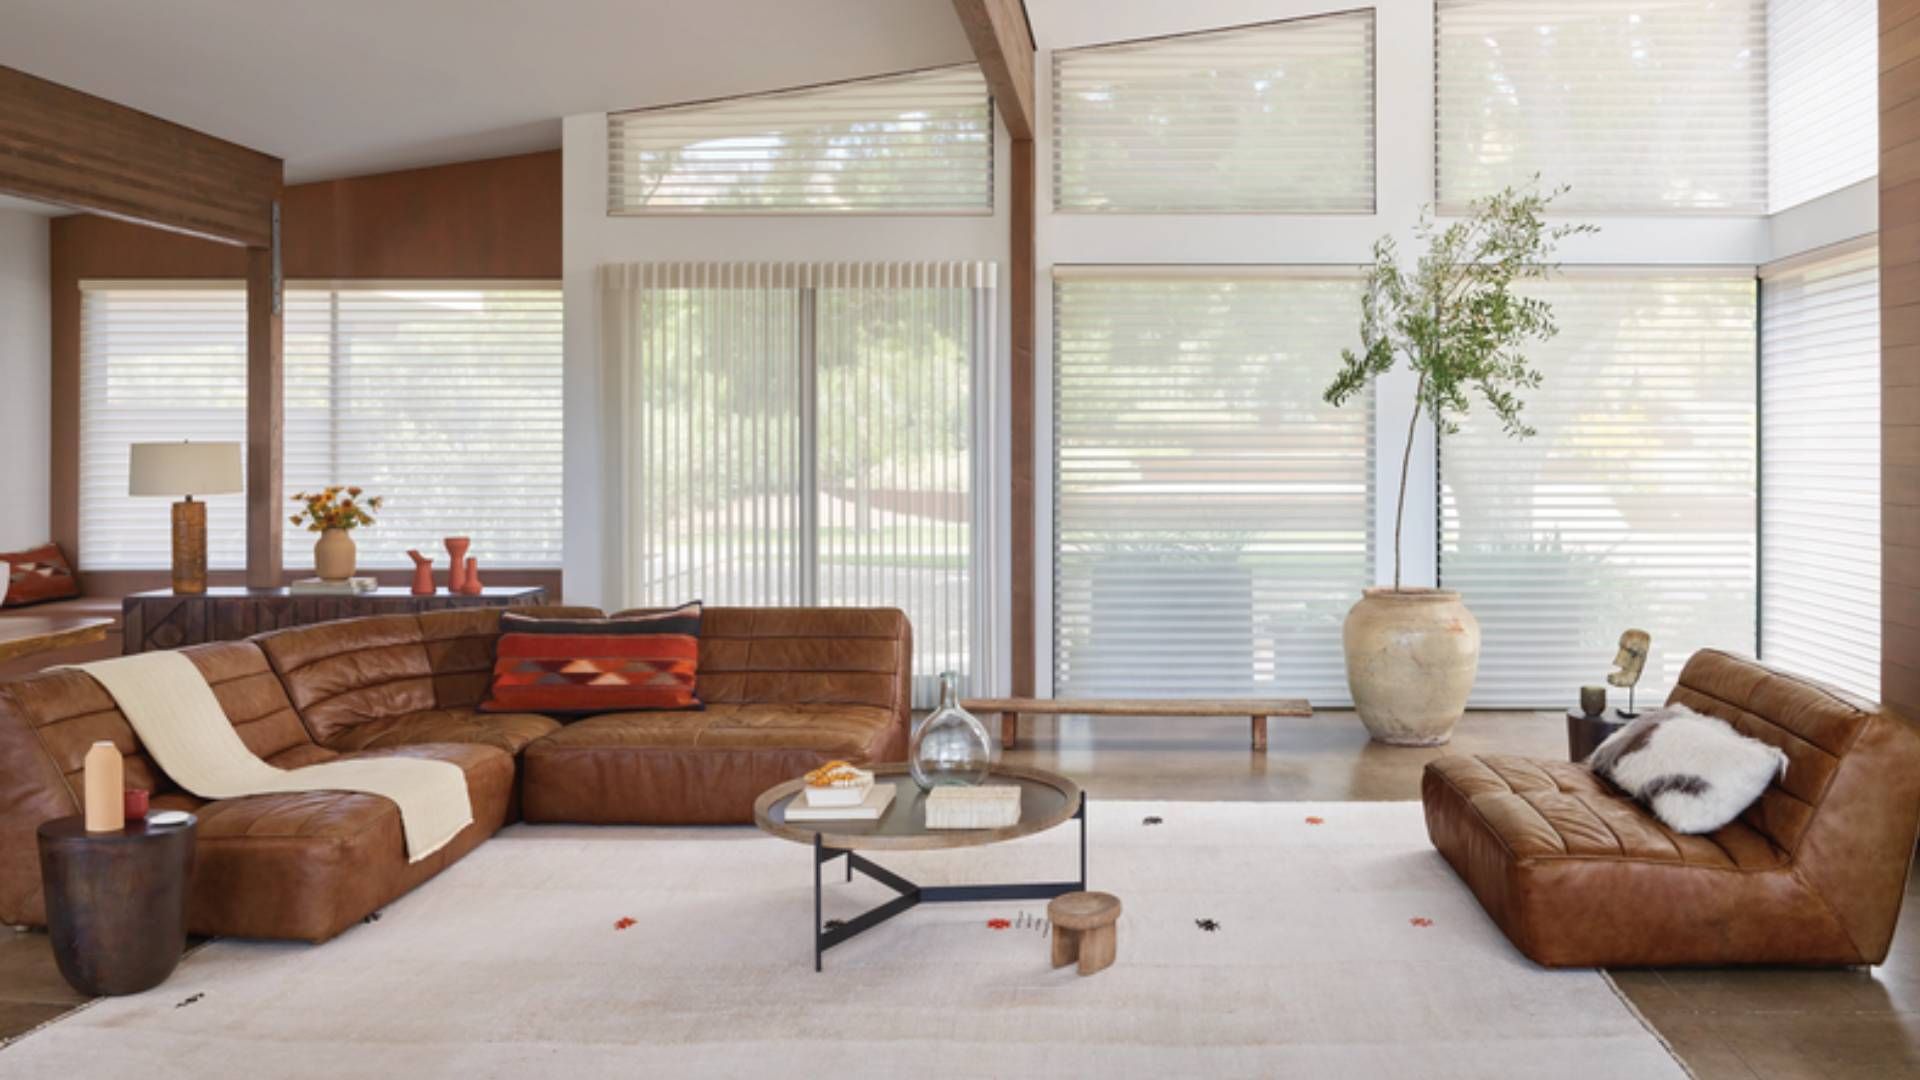 Hunter Douglas Silhouette® Sheer Shades decorating angled windows in a home living room at Curtain C